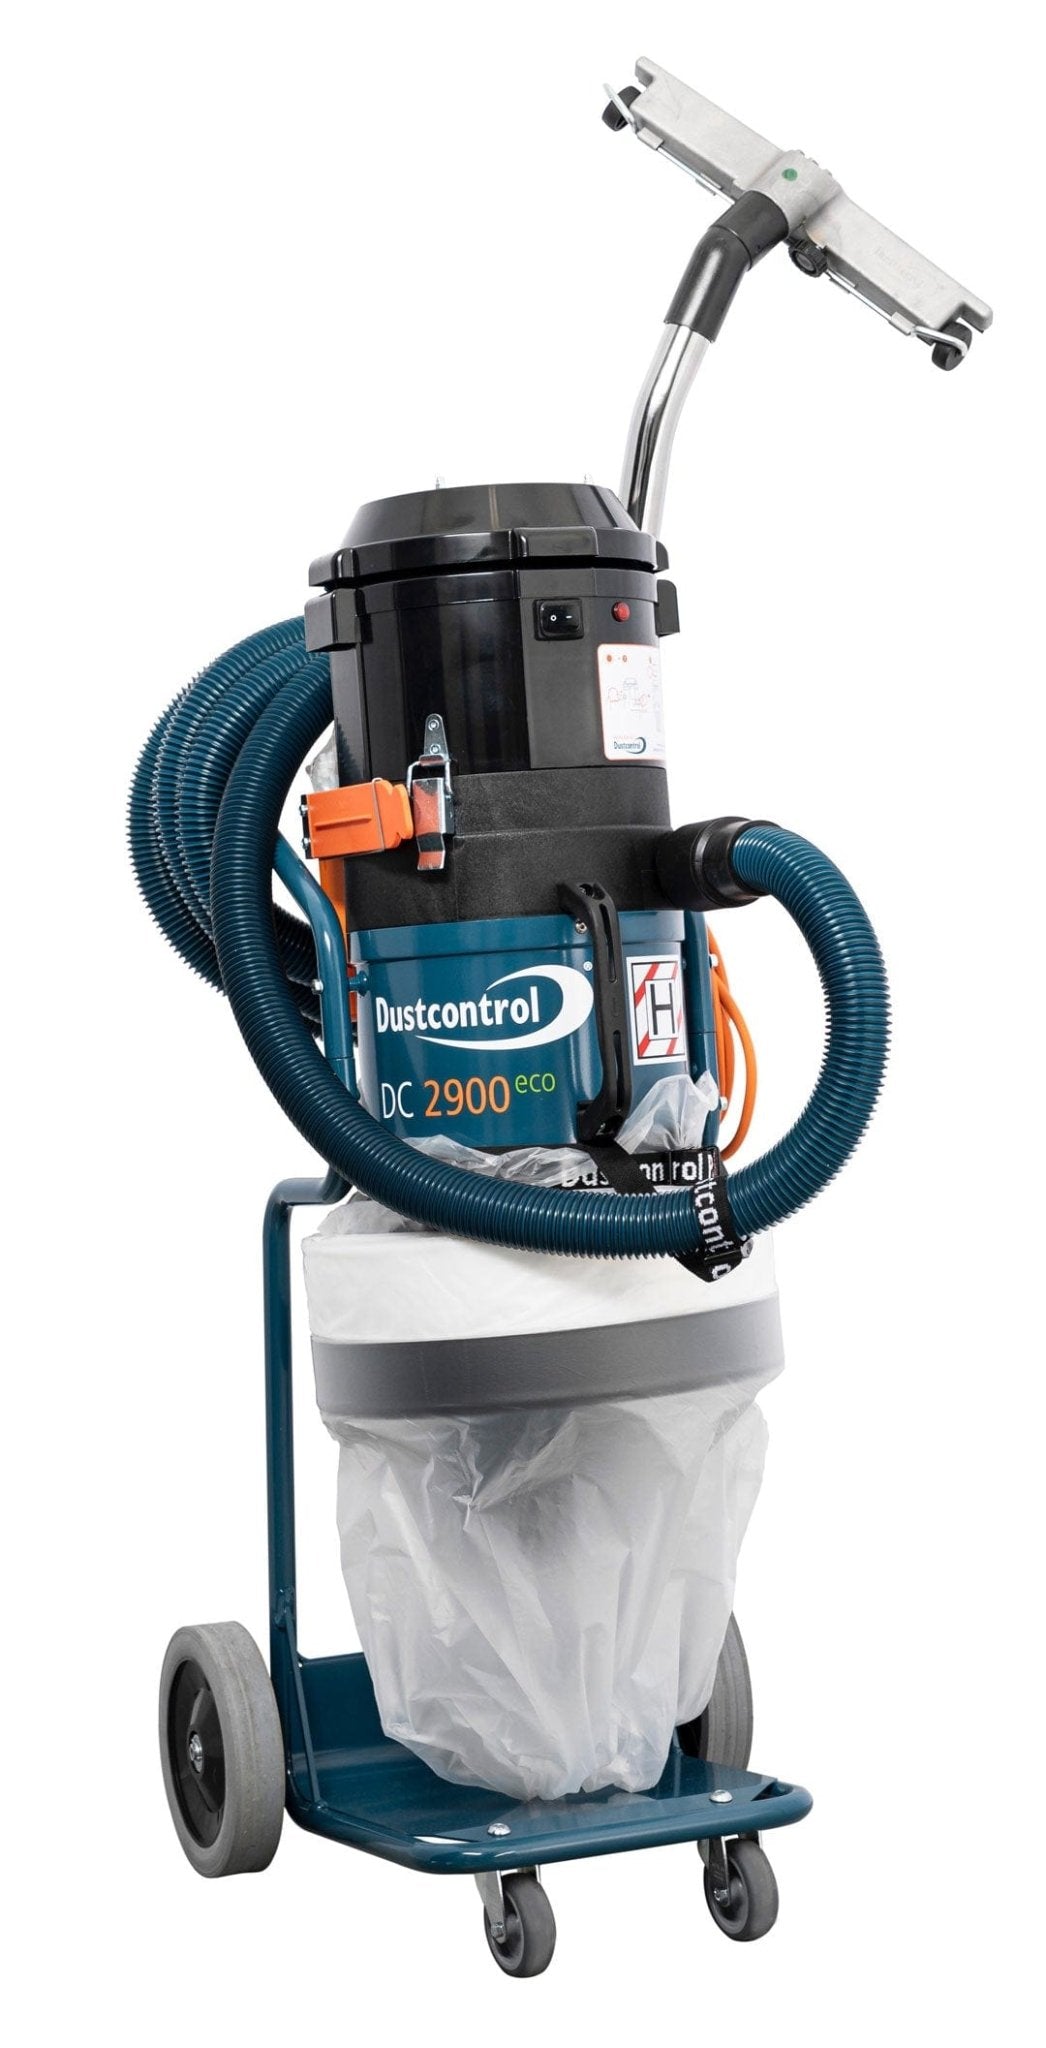 DC 2900L Eco Dust Collector - Xtreme Polishing Systems: dust collectors, dust collector systems, concrete dust extractors, and concrete grinding vacuums.